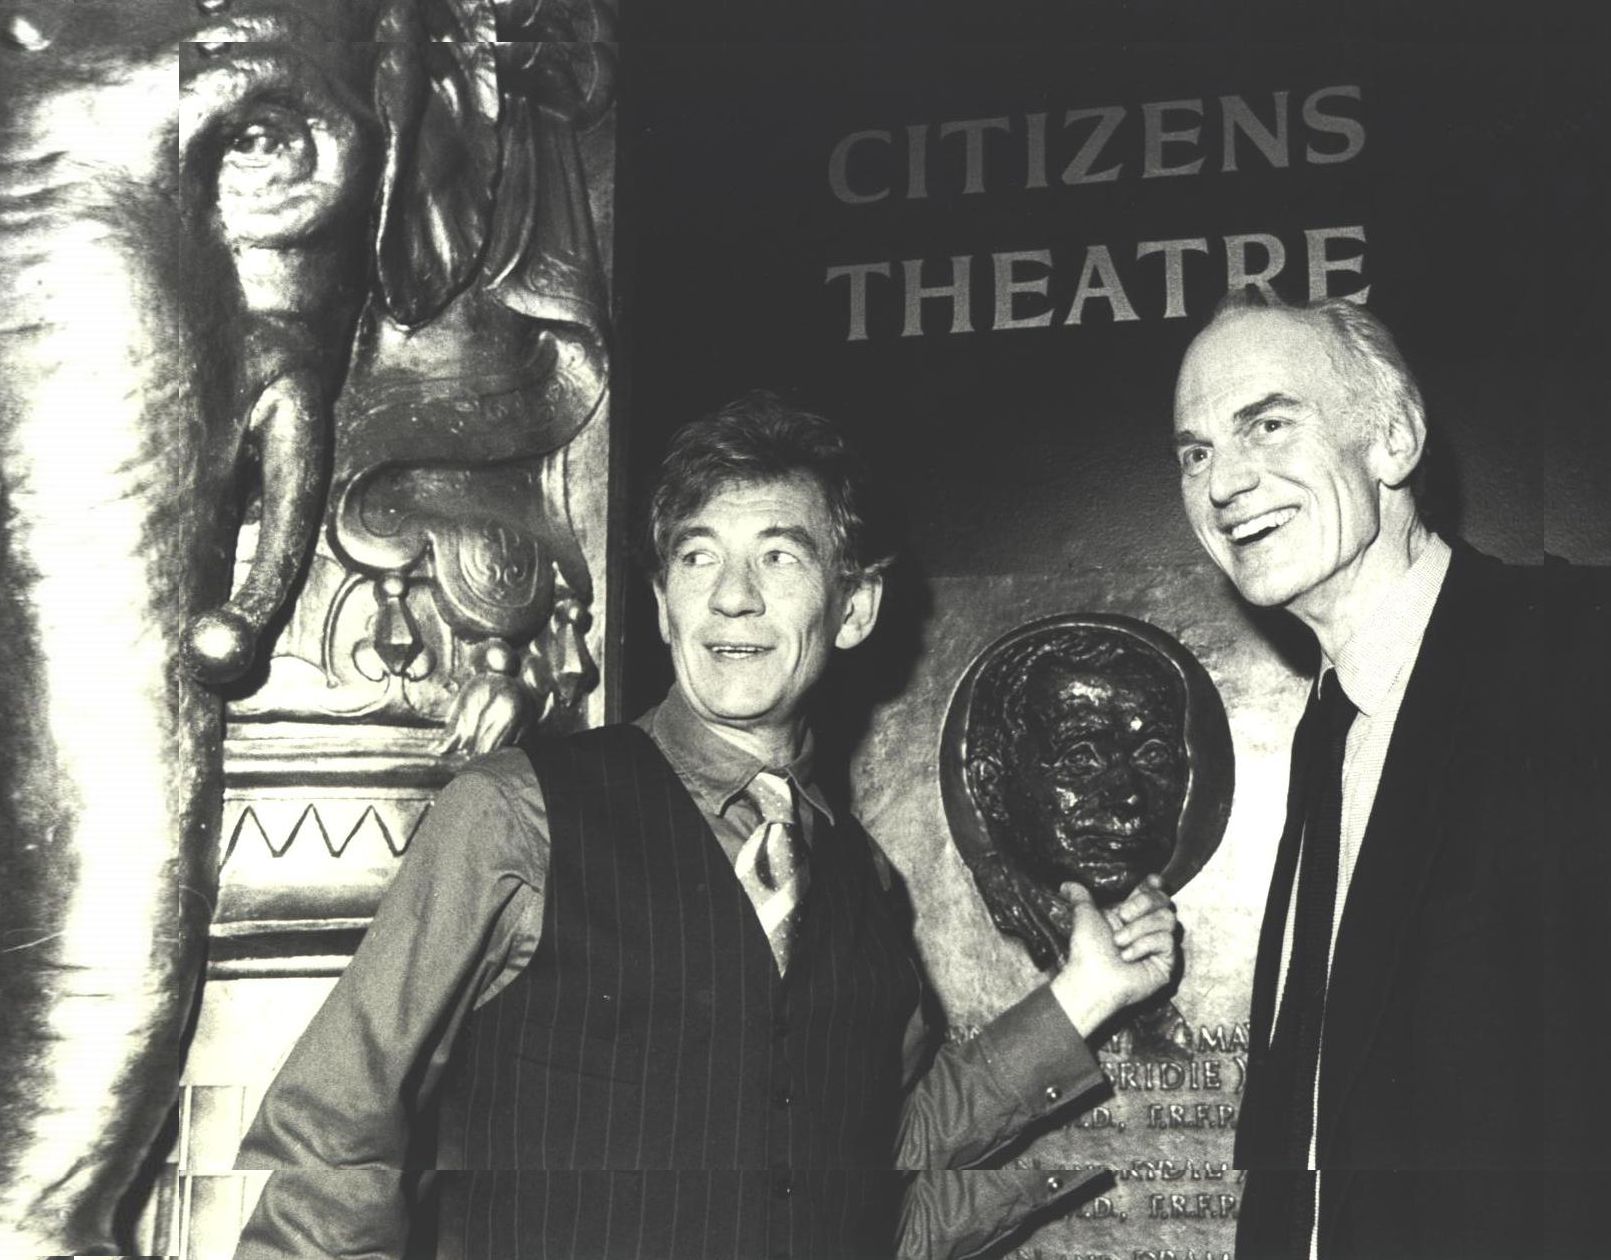 Sir Ian McKellen and Giles Havergal in front of Citizens' Theatre sign (STA GHC 1/8)